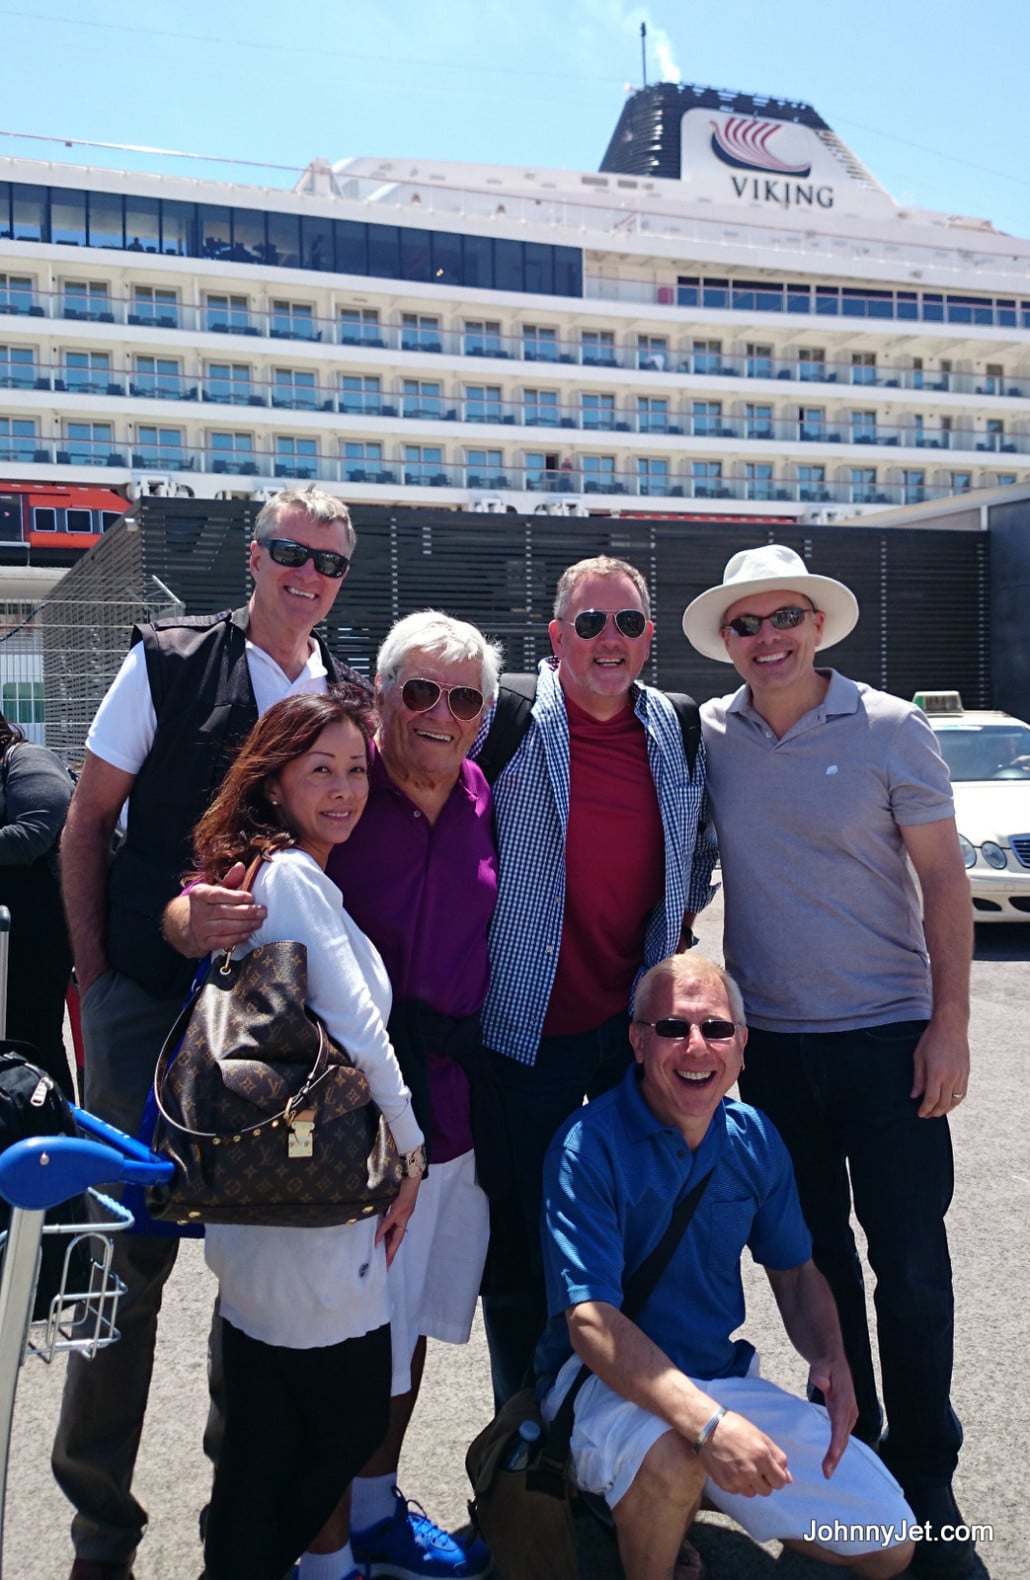 Ran into other travel bloggers while boarding Viking Star in Lisbon,